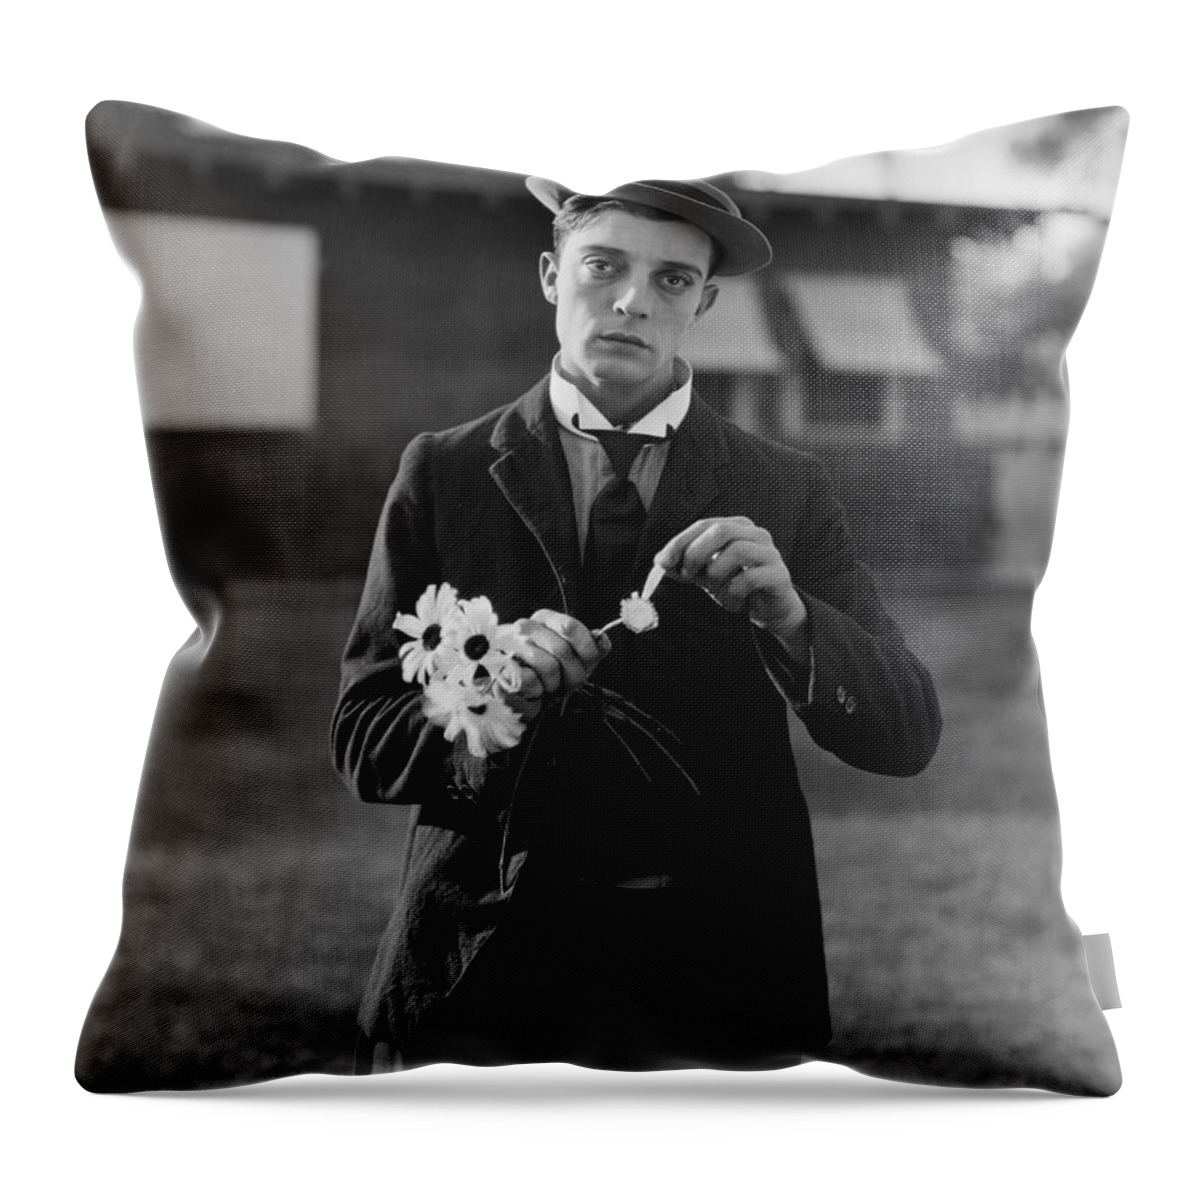 Movie Poster Throw Pillow featuring the photograph Buster Keaton Portrait by Georgia Fowler